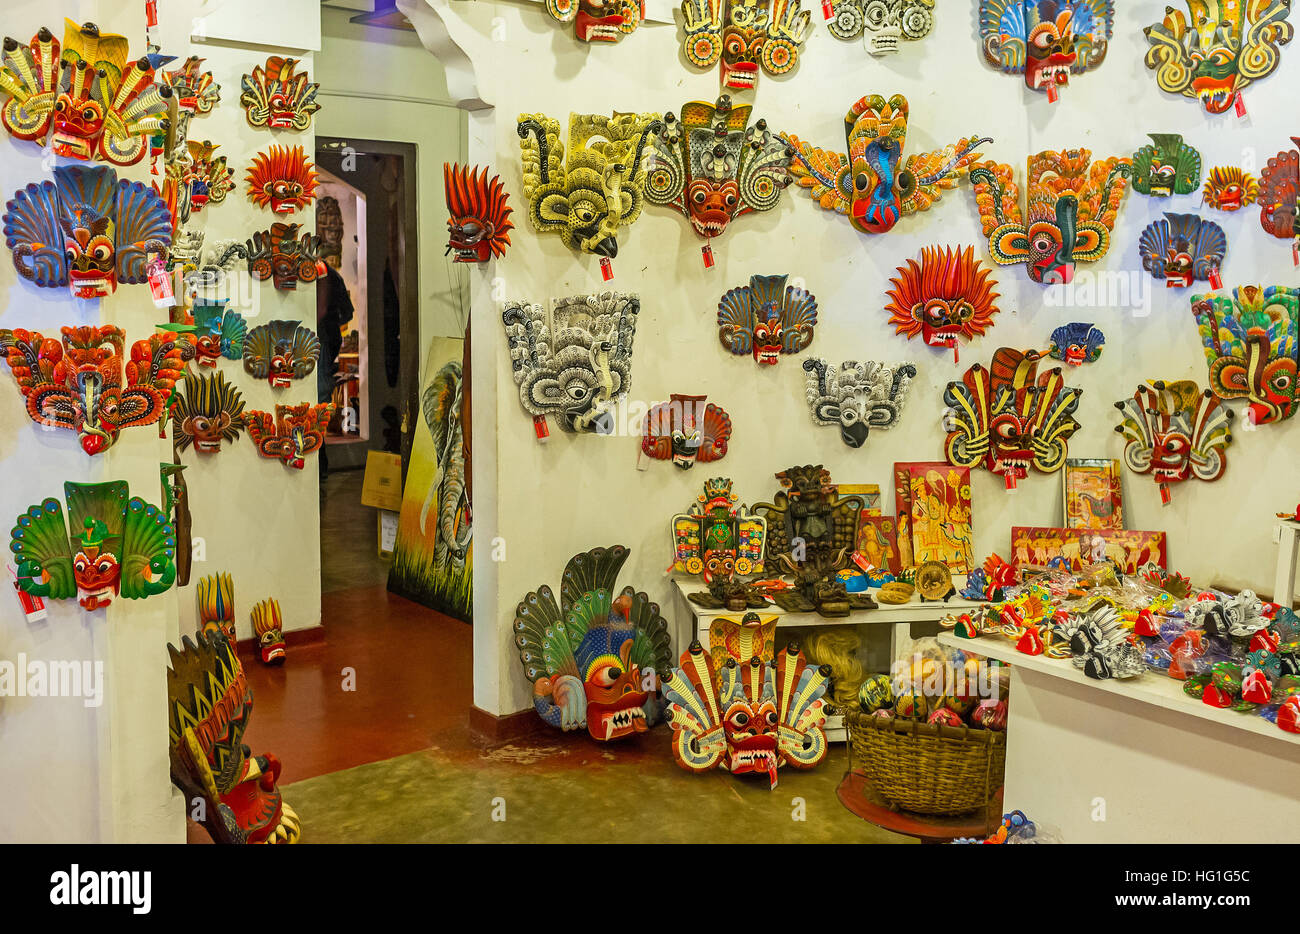 The large mask store next to the mask museum, offers interesting gifts and home decors Stock Photo